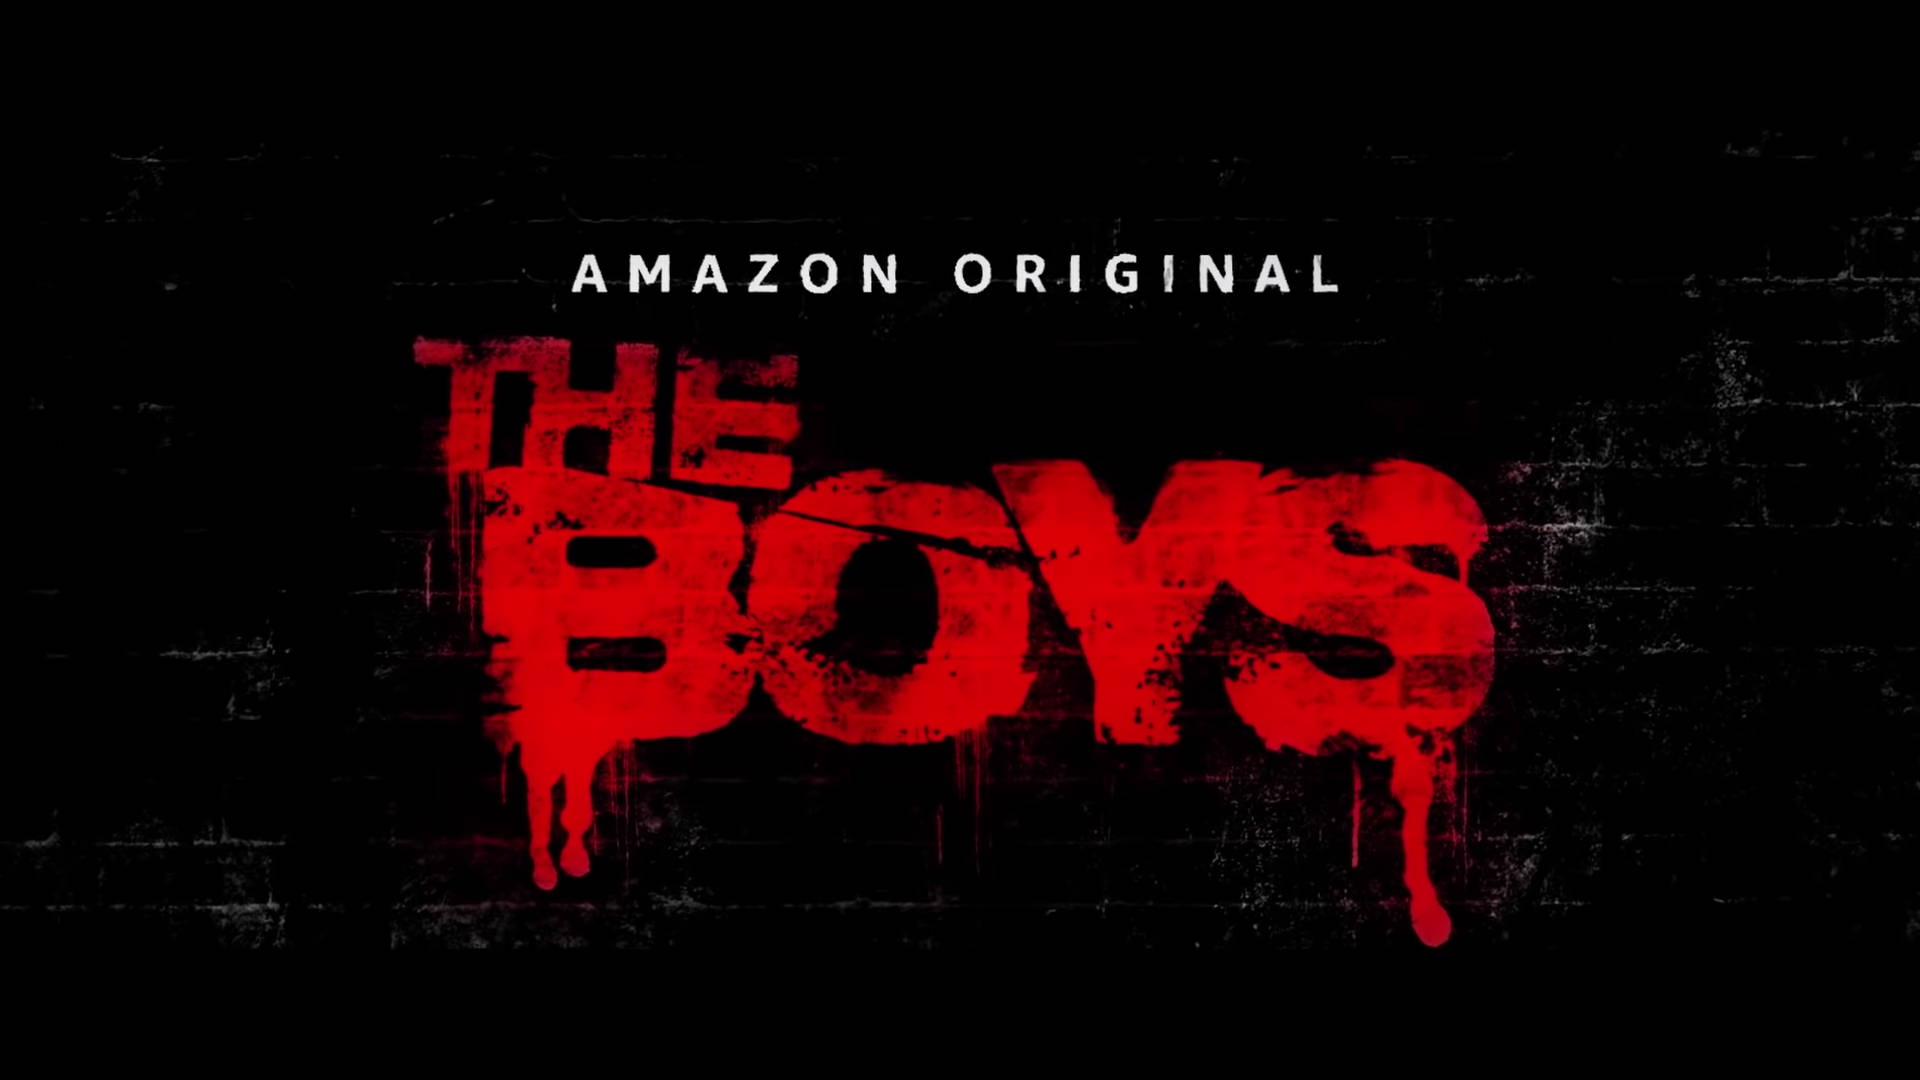 Intense Stare Of The Boys From Amazon Original Series Background